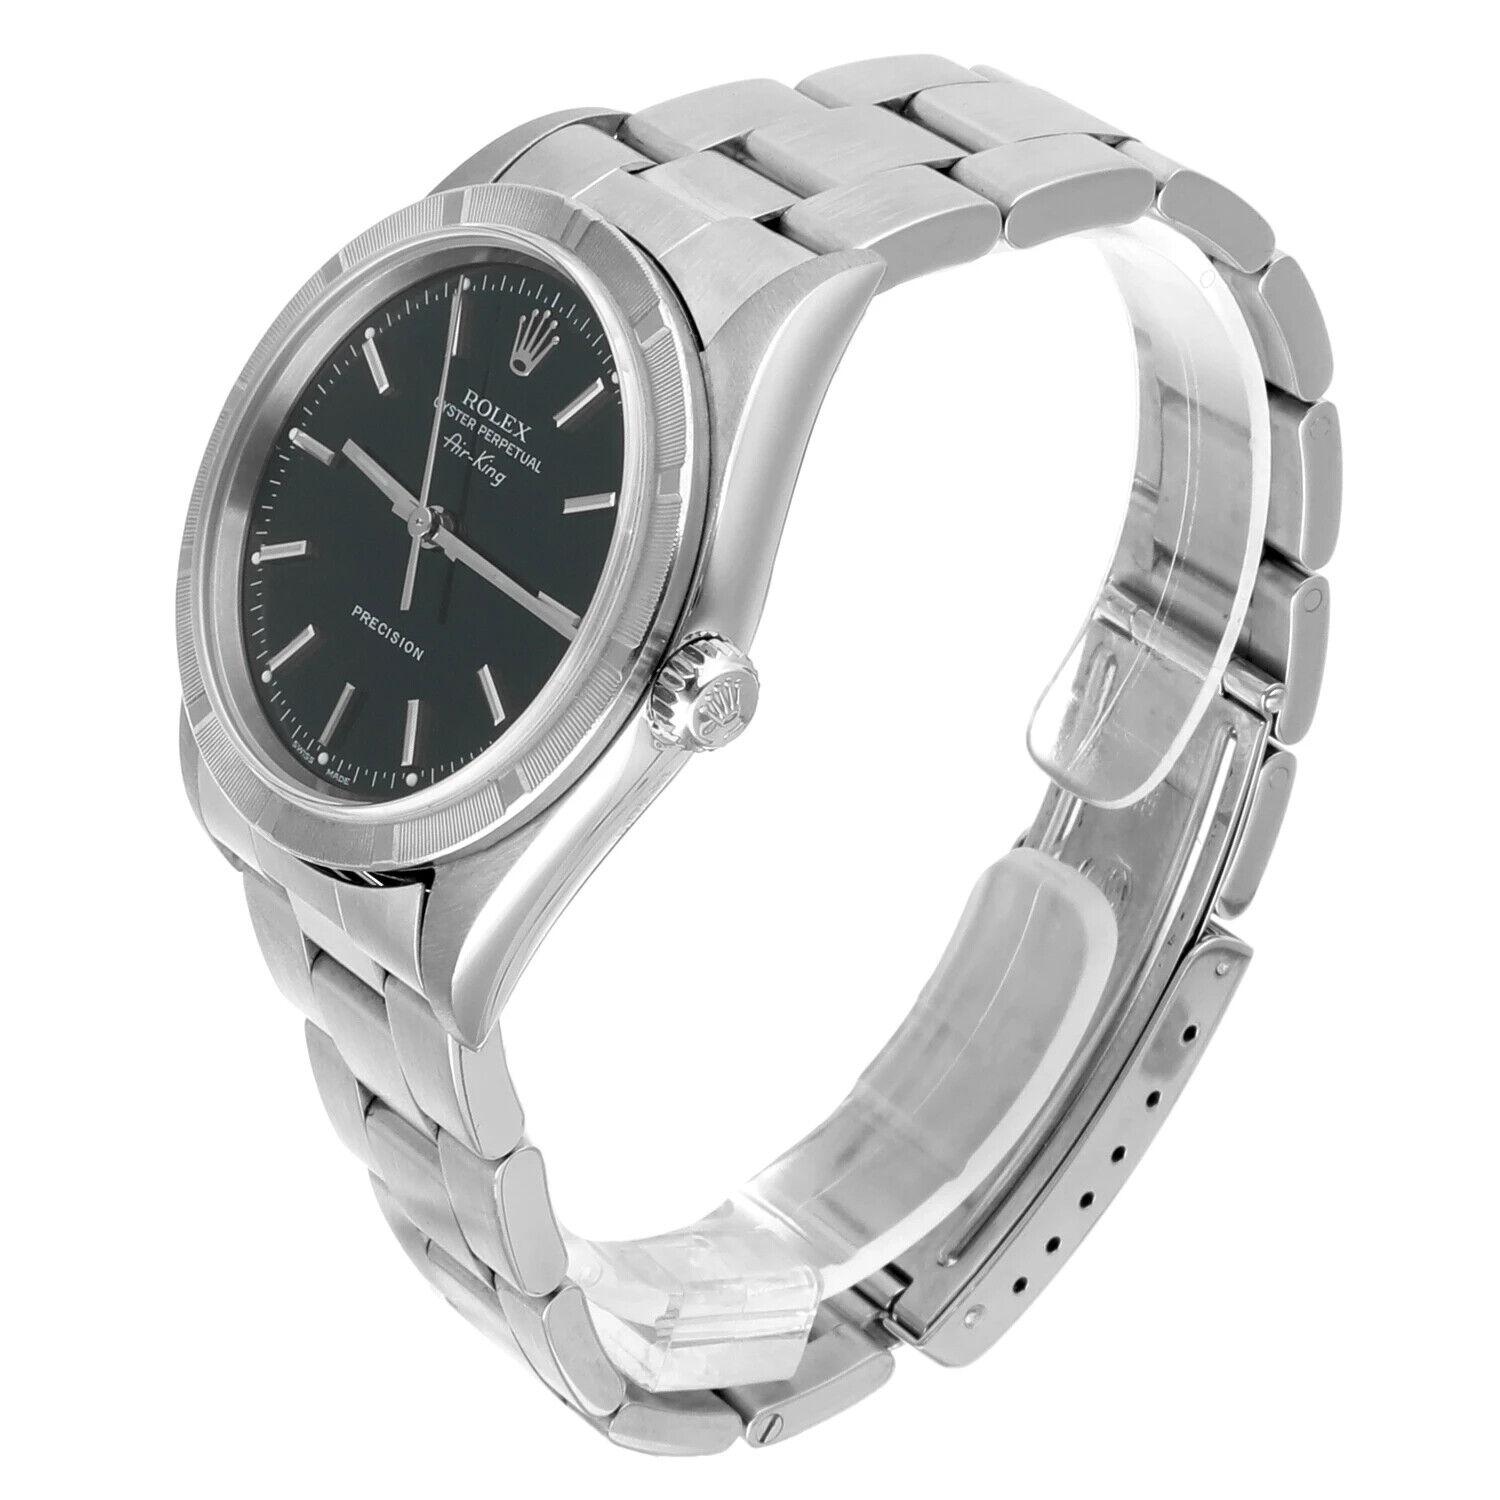 Montre Rolex Oyster Perpetual Air-King 34mm Black Stainless Steel Oyster 14010 Unisexe en vente